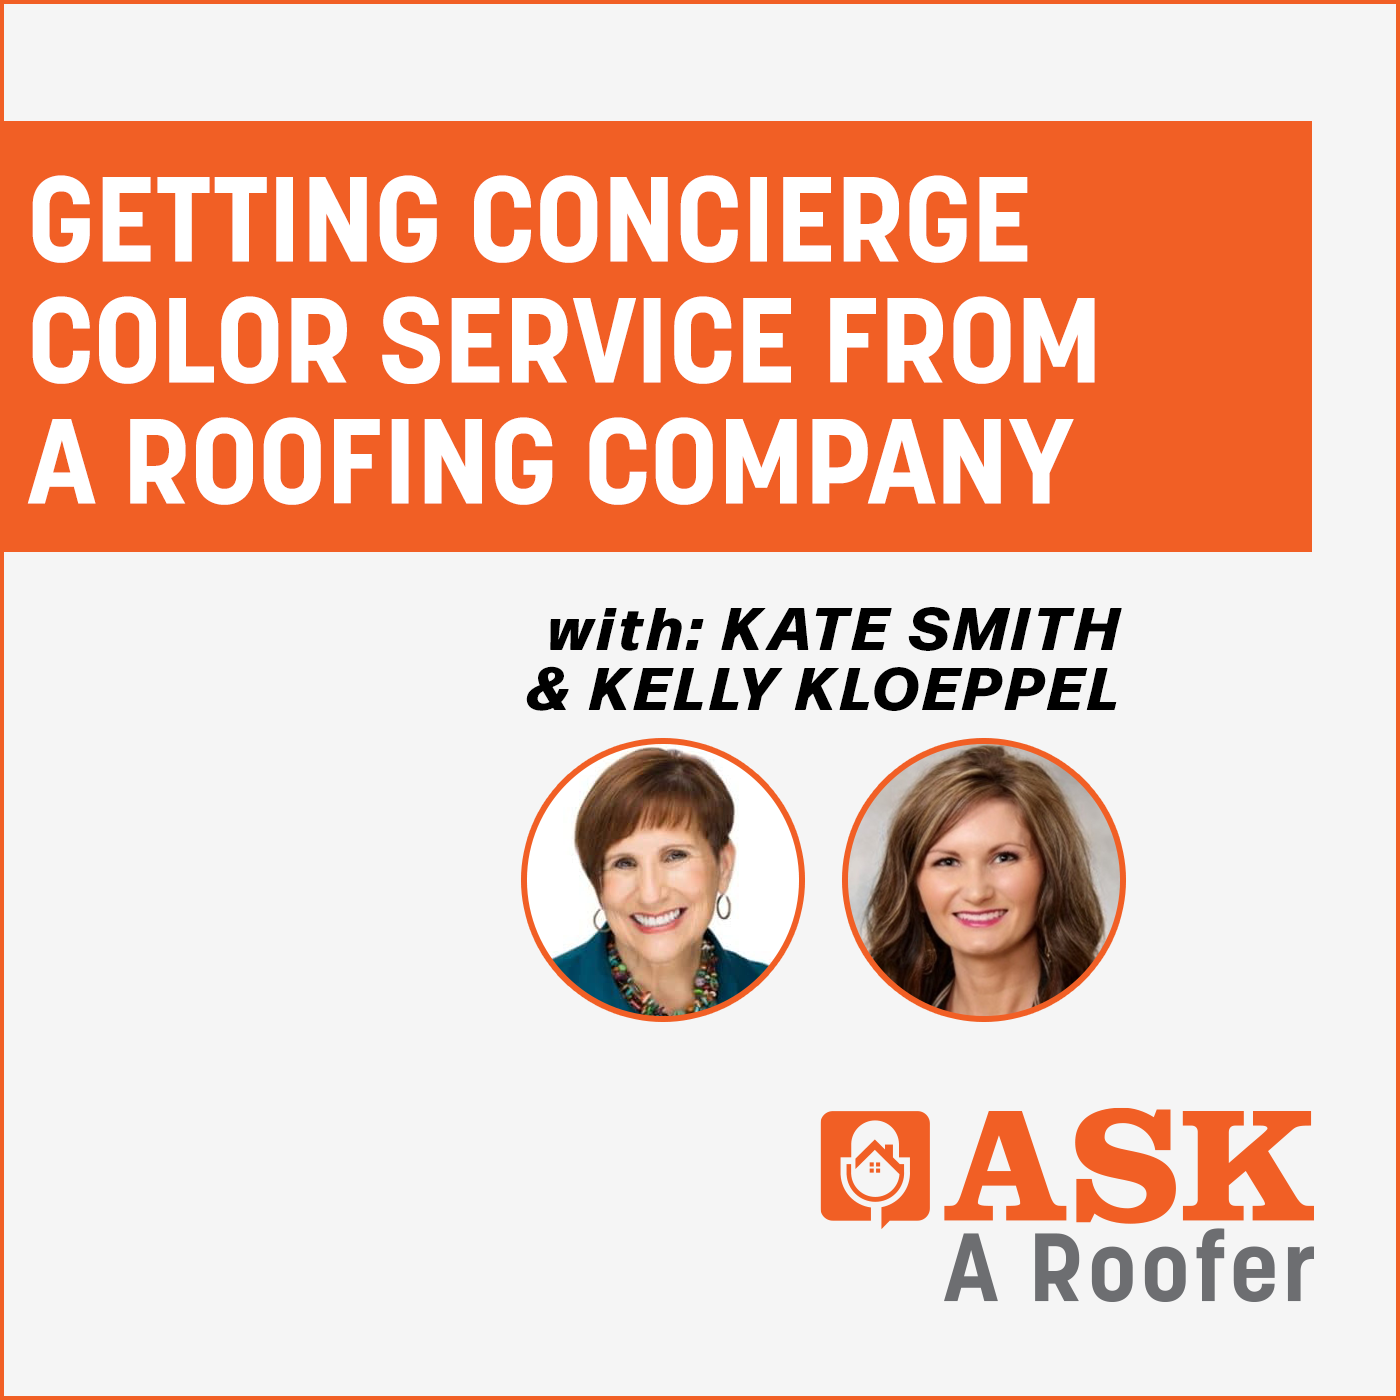 DaVinci - Getting Concierge Color Service from a Roofing Company